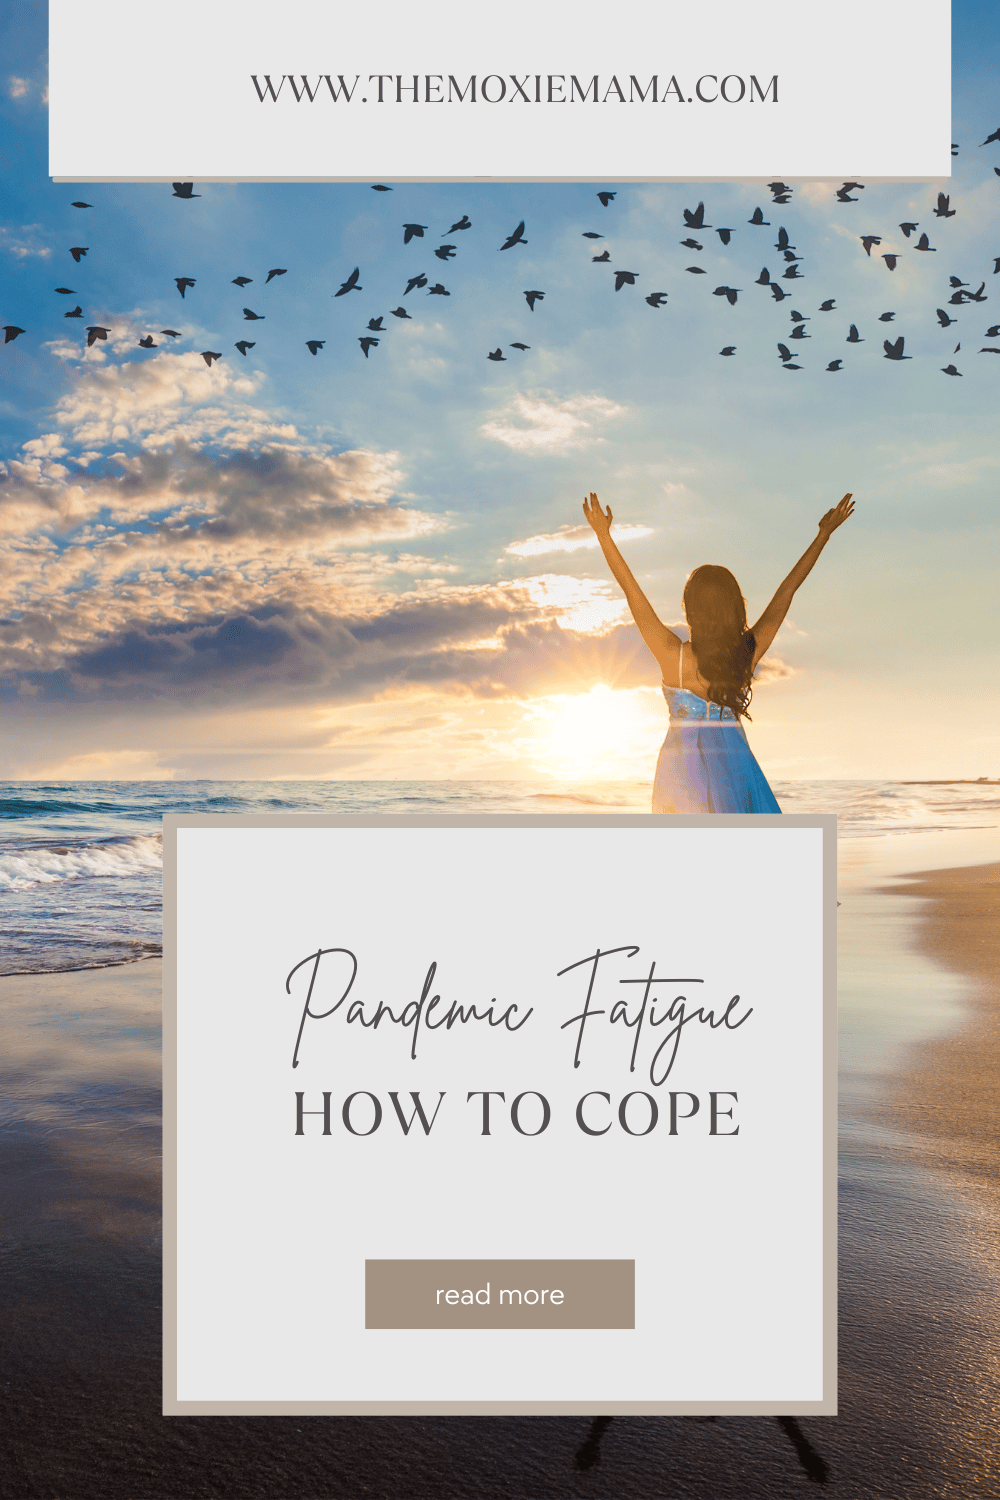 Tips for coping with pandemic fatigue